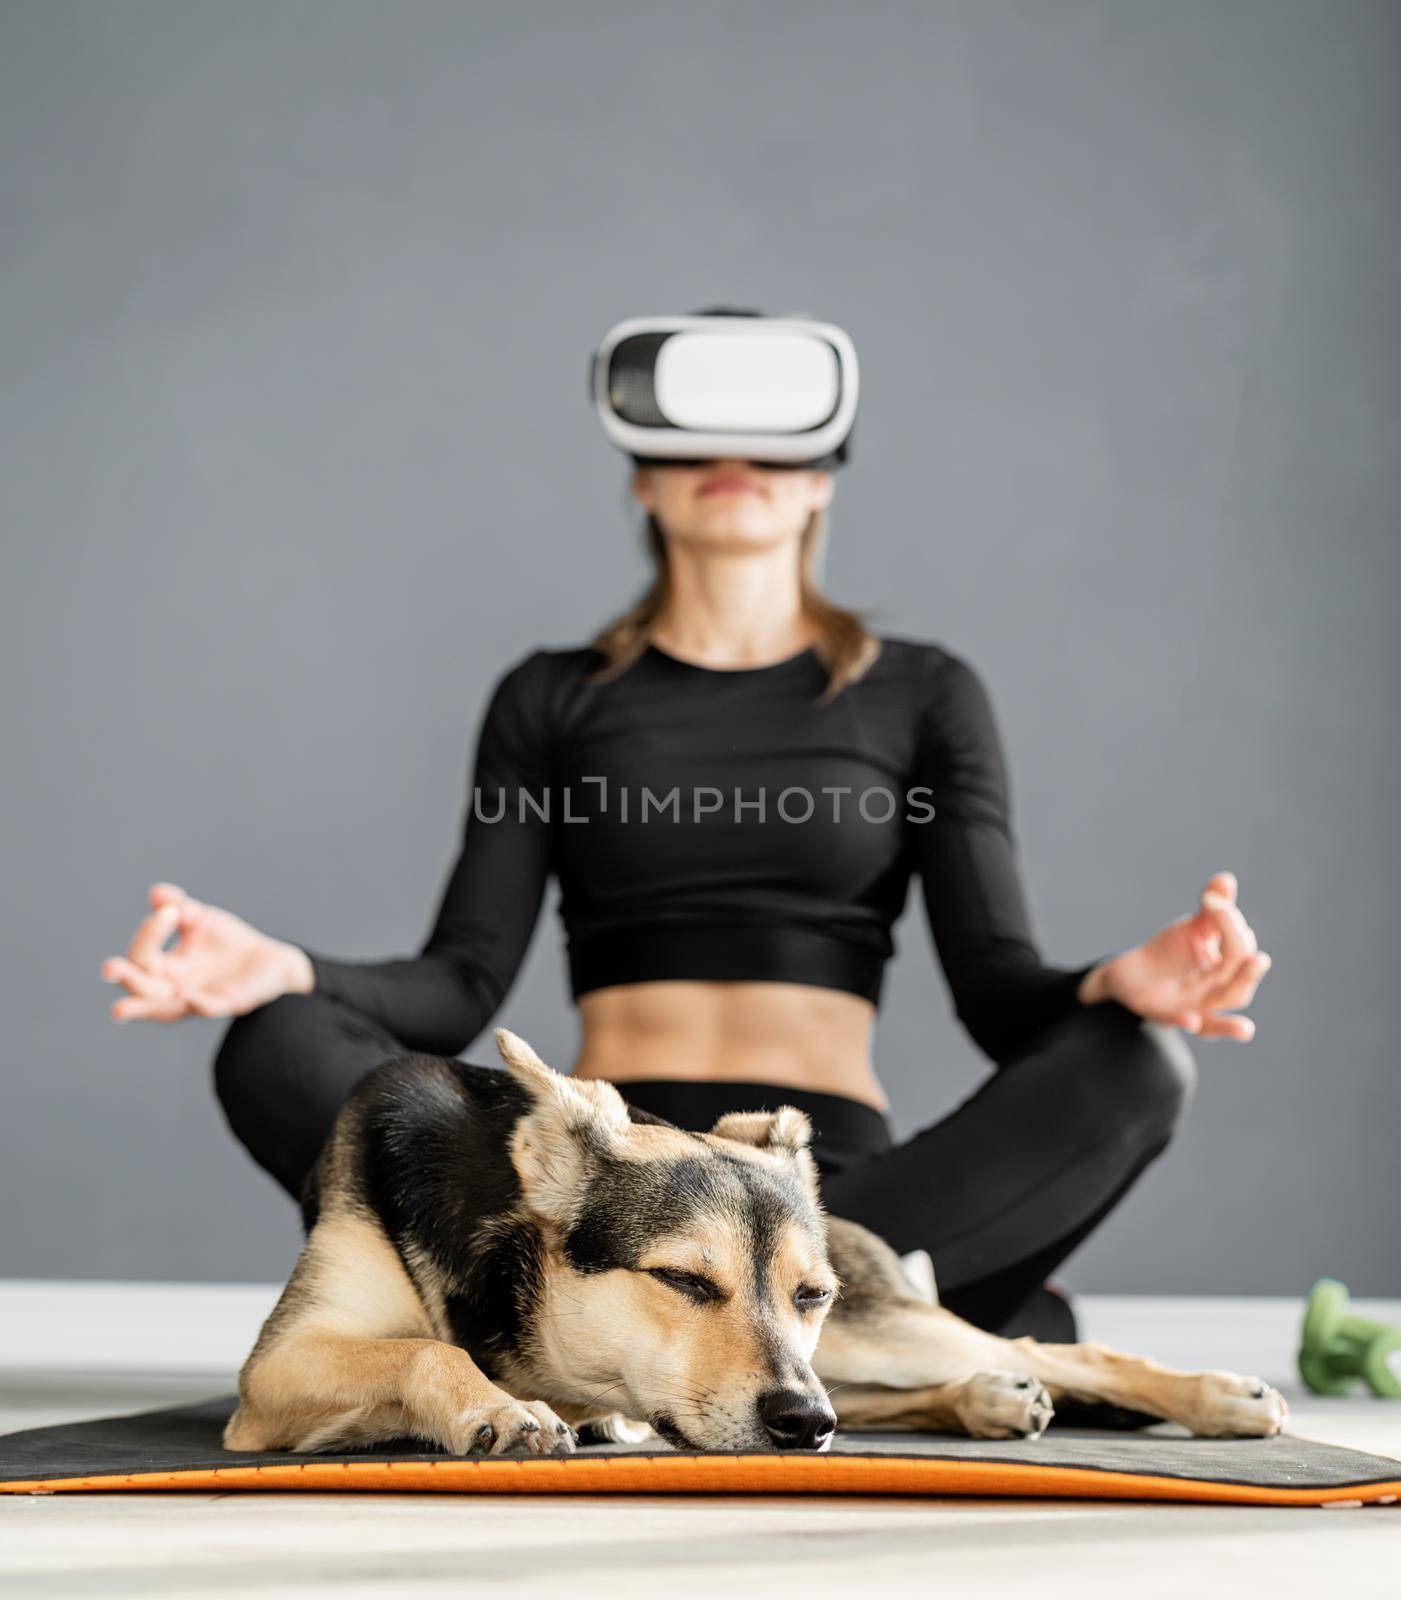 Fitness, sport and technology. Young athletic woman wearing virtual reality glasses sitting on fitness mat with dog